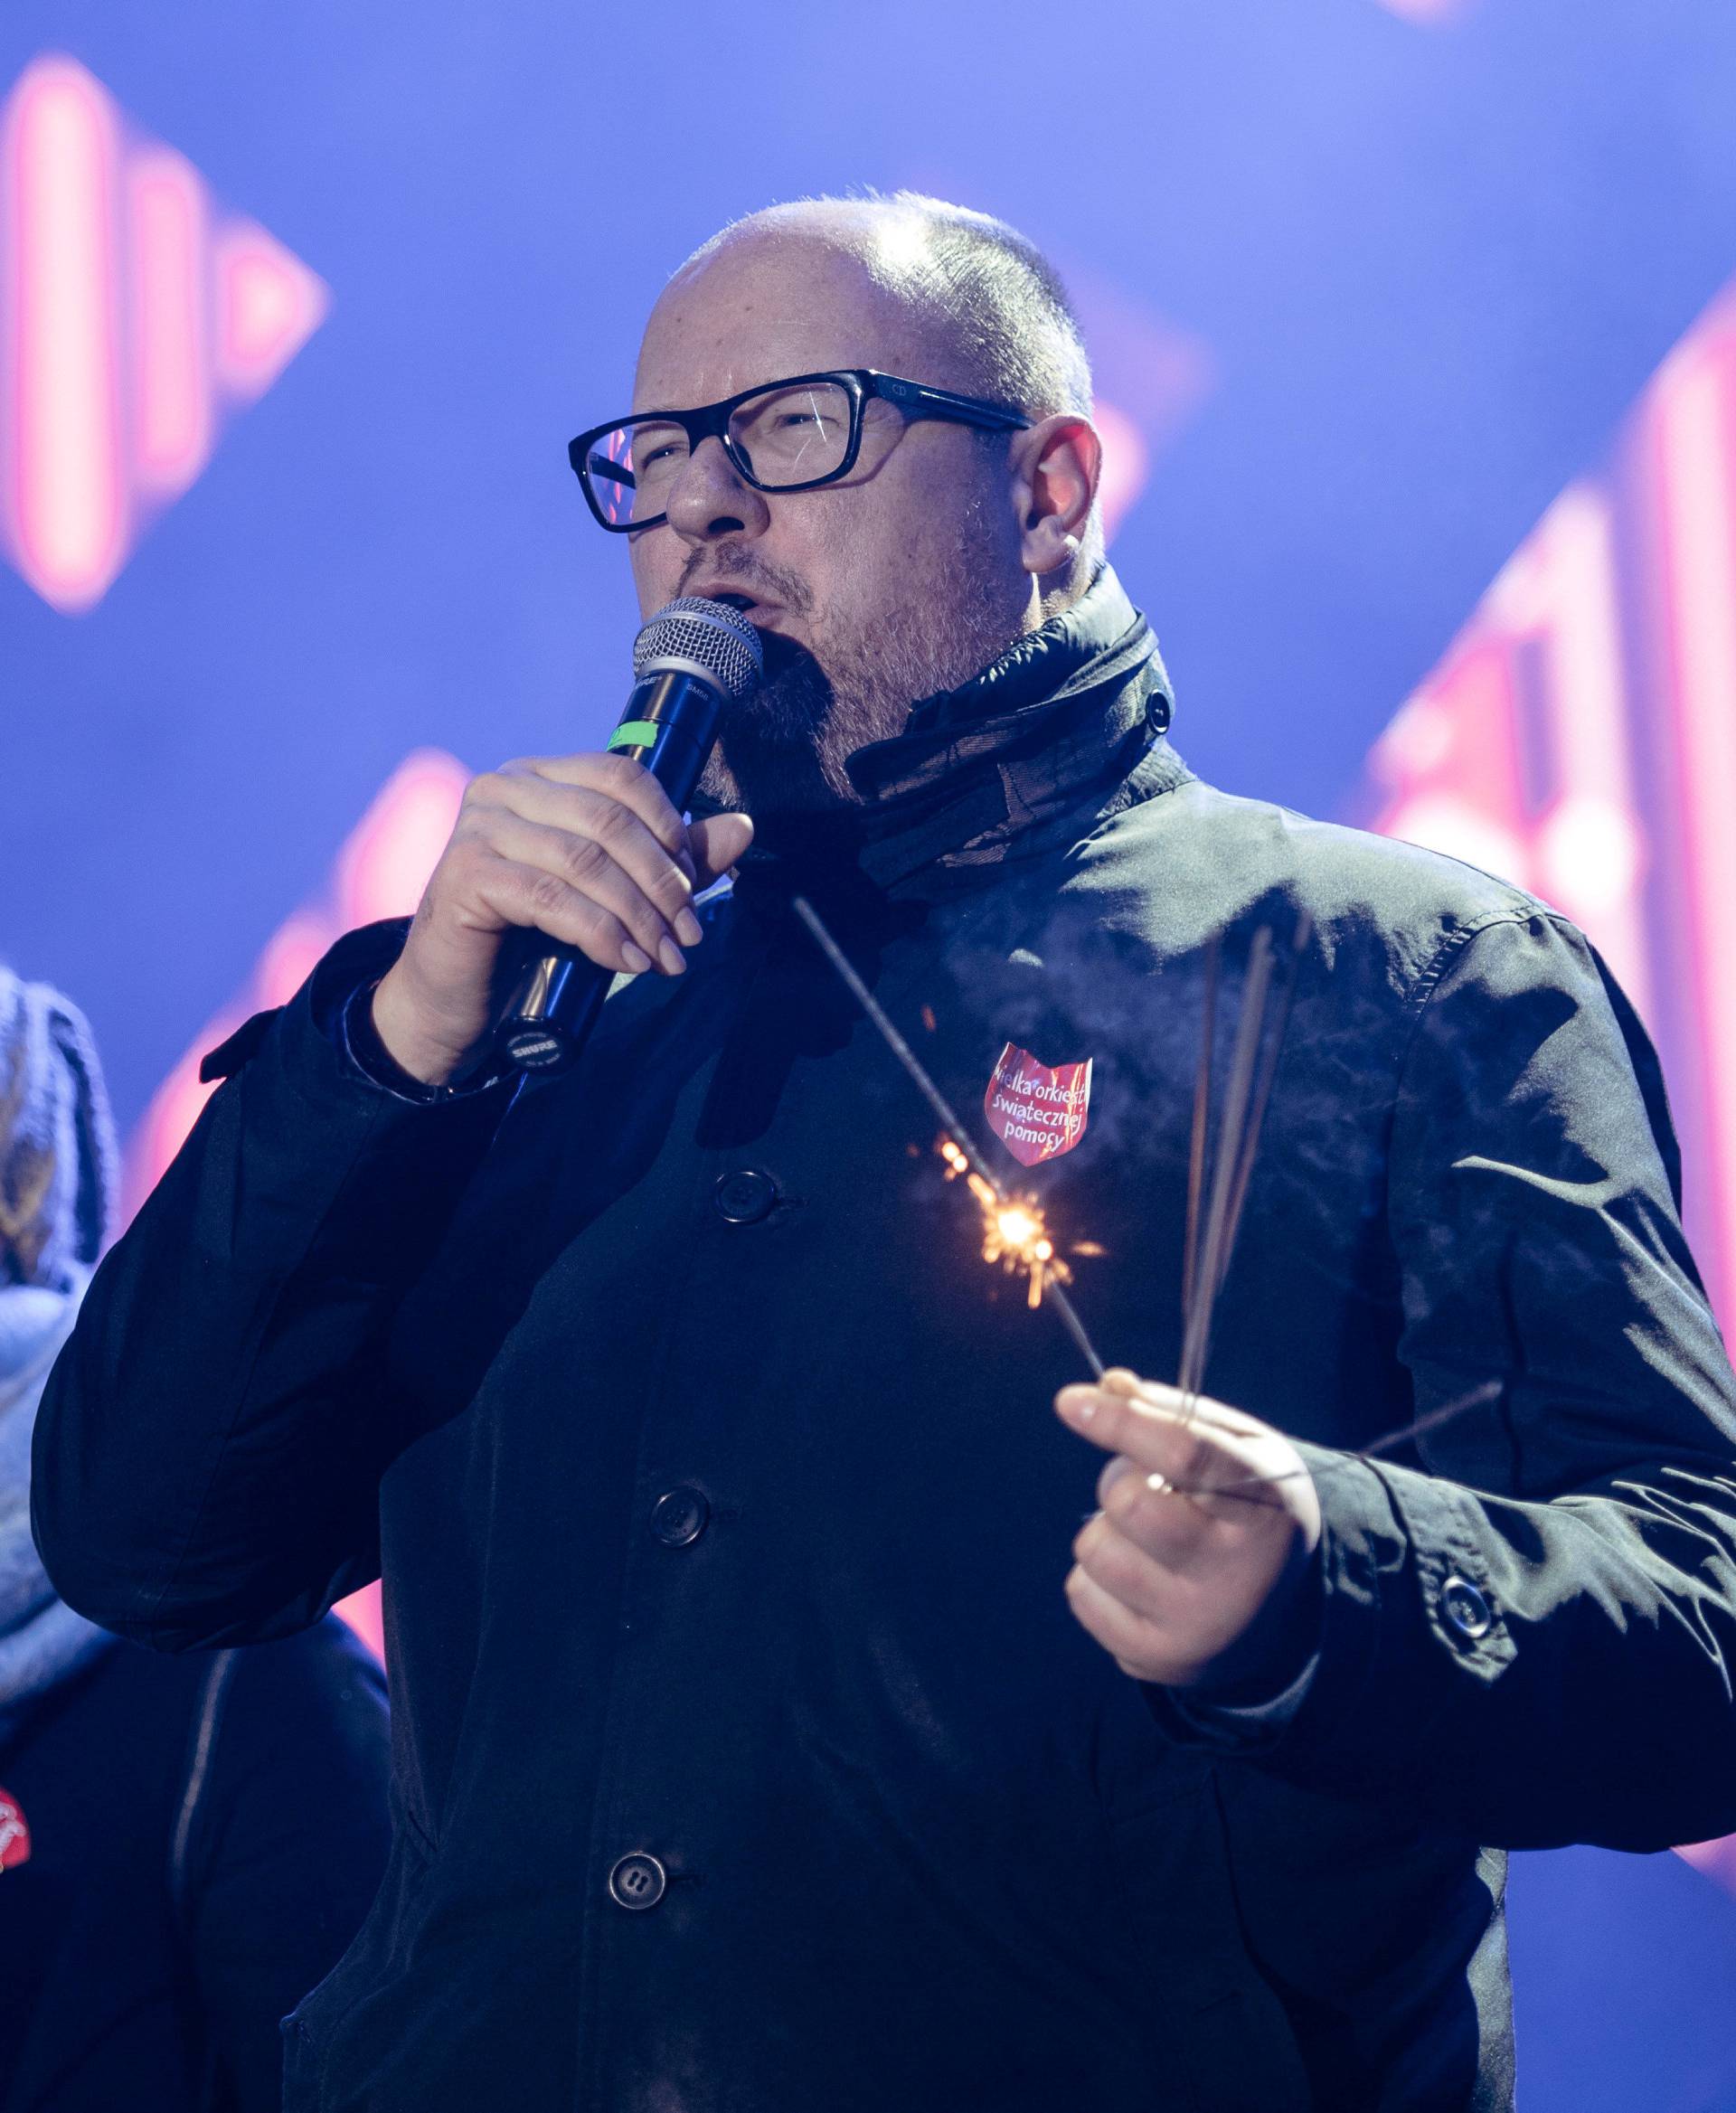 Gdansk's Mayor Pawel Adamowicz speaks during the 27th Grand Finale of the Great Orchestra of Christmas Charity in Gdansk